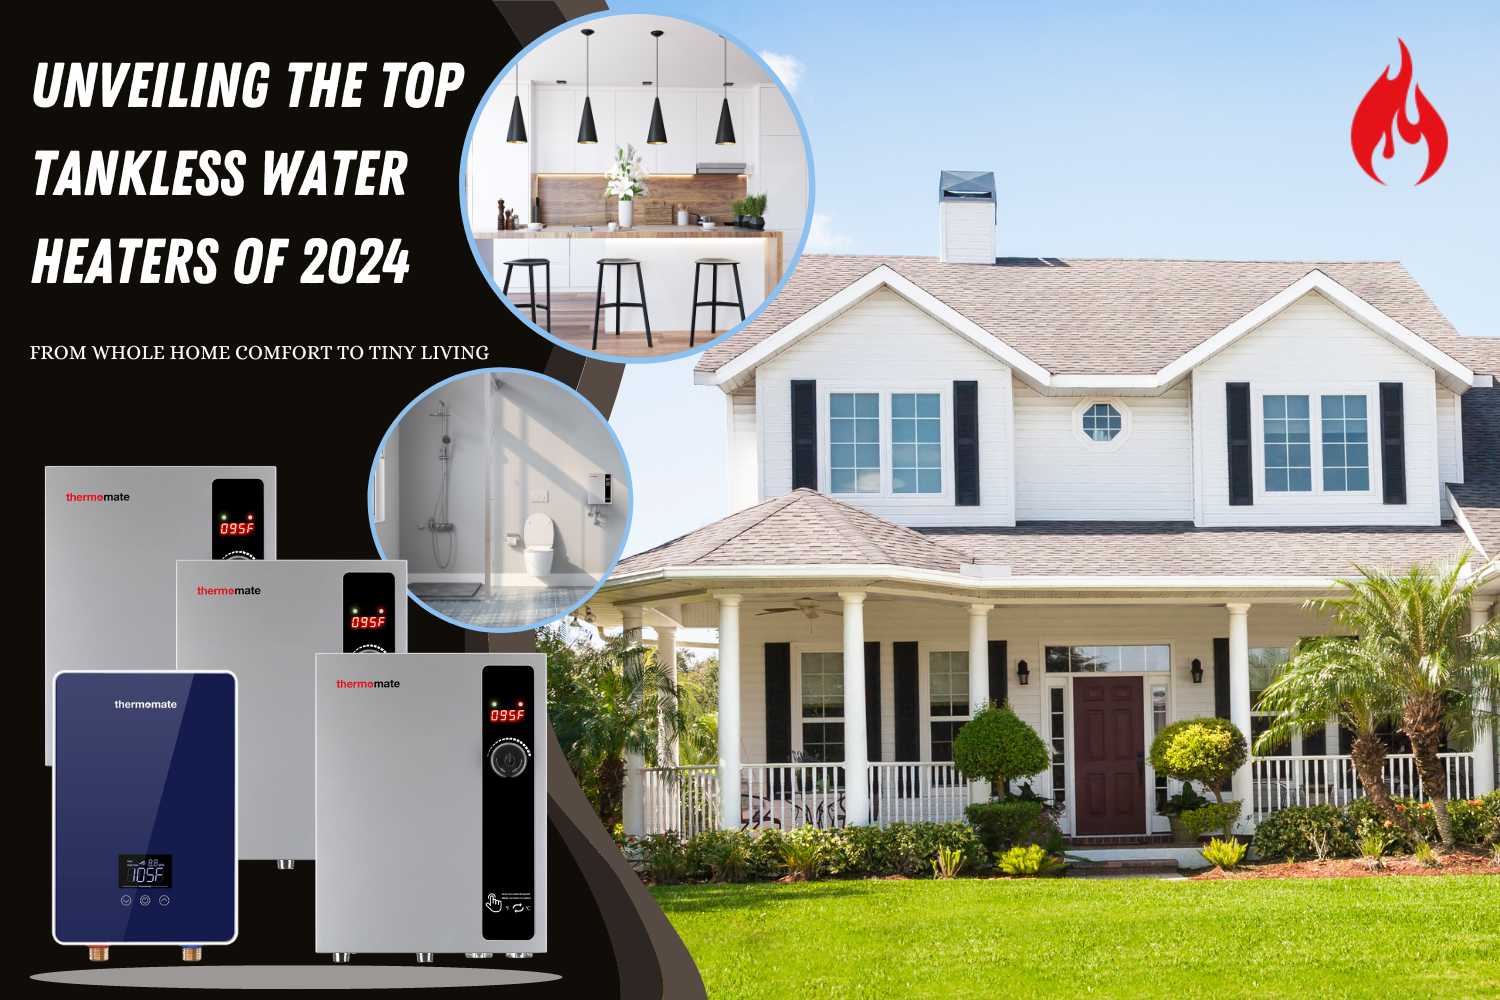 Unveiling the Top Tankless Water Heaters of 2024: From Whole Home Comfort to Tiny Living